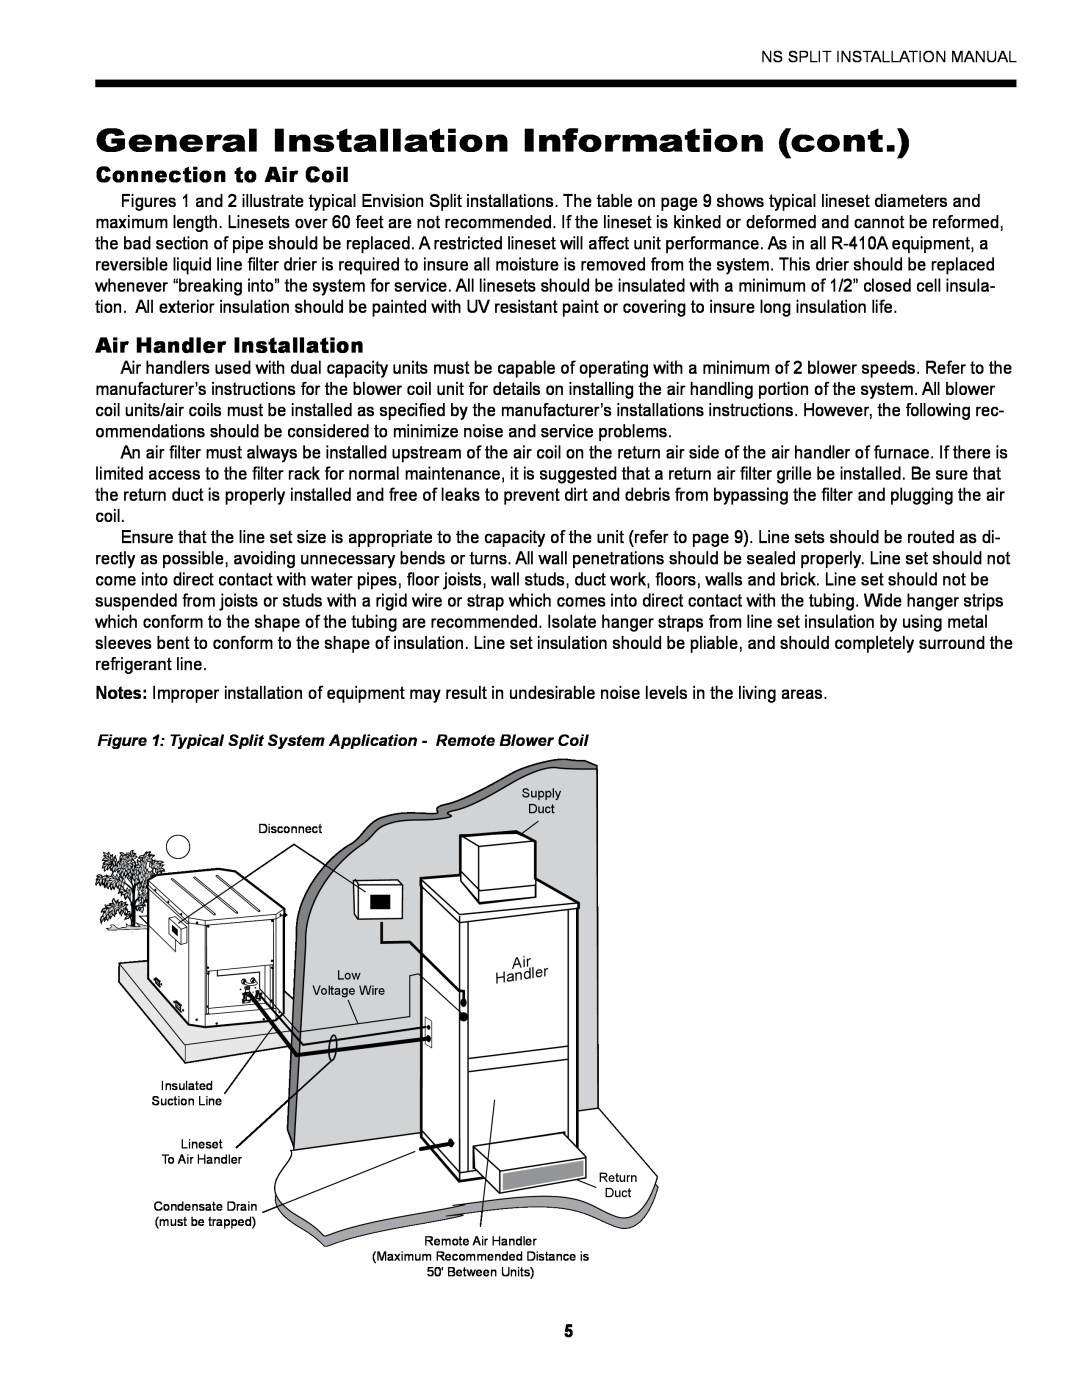 Envision Peripherals Series General Installation Information cont, Connection to Air Coil, Air Handler Installation 